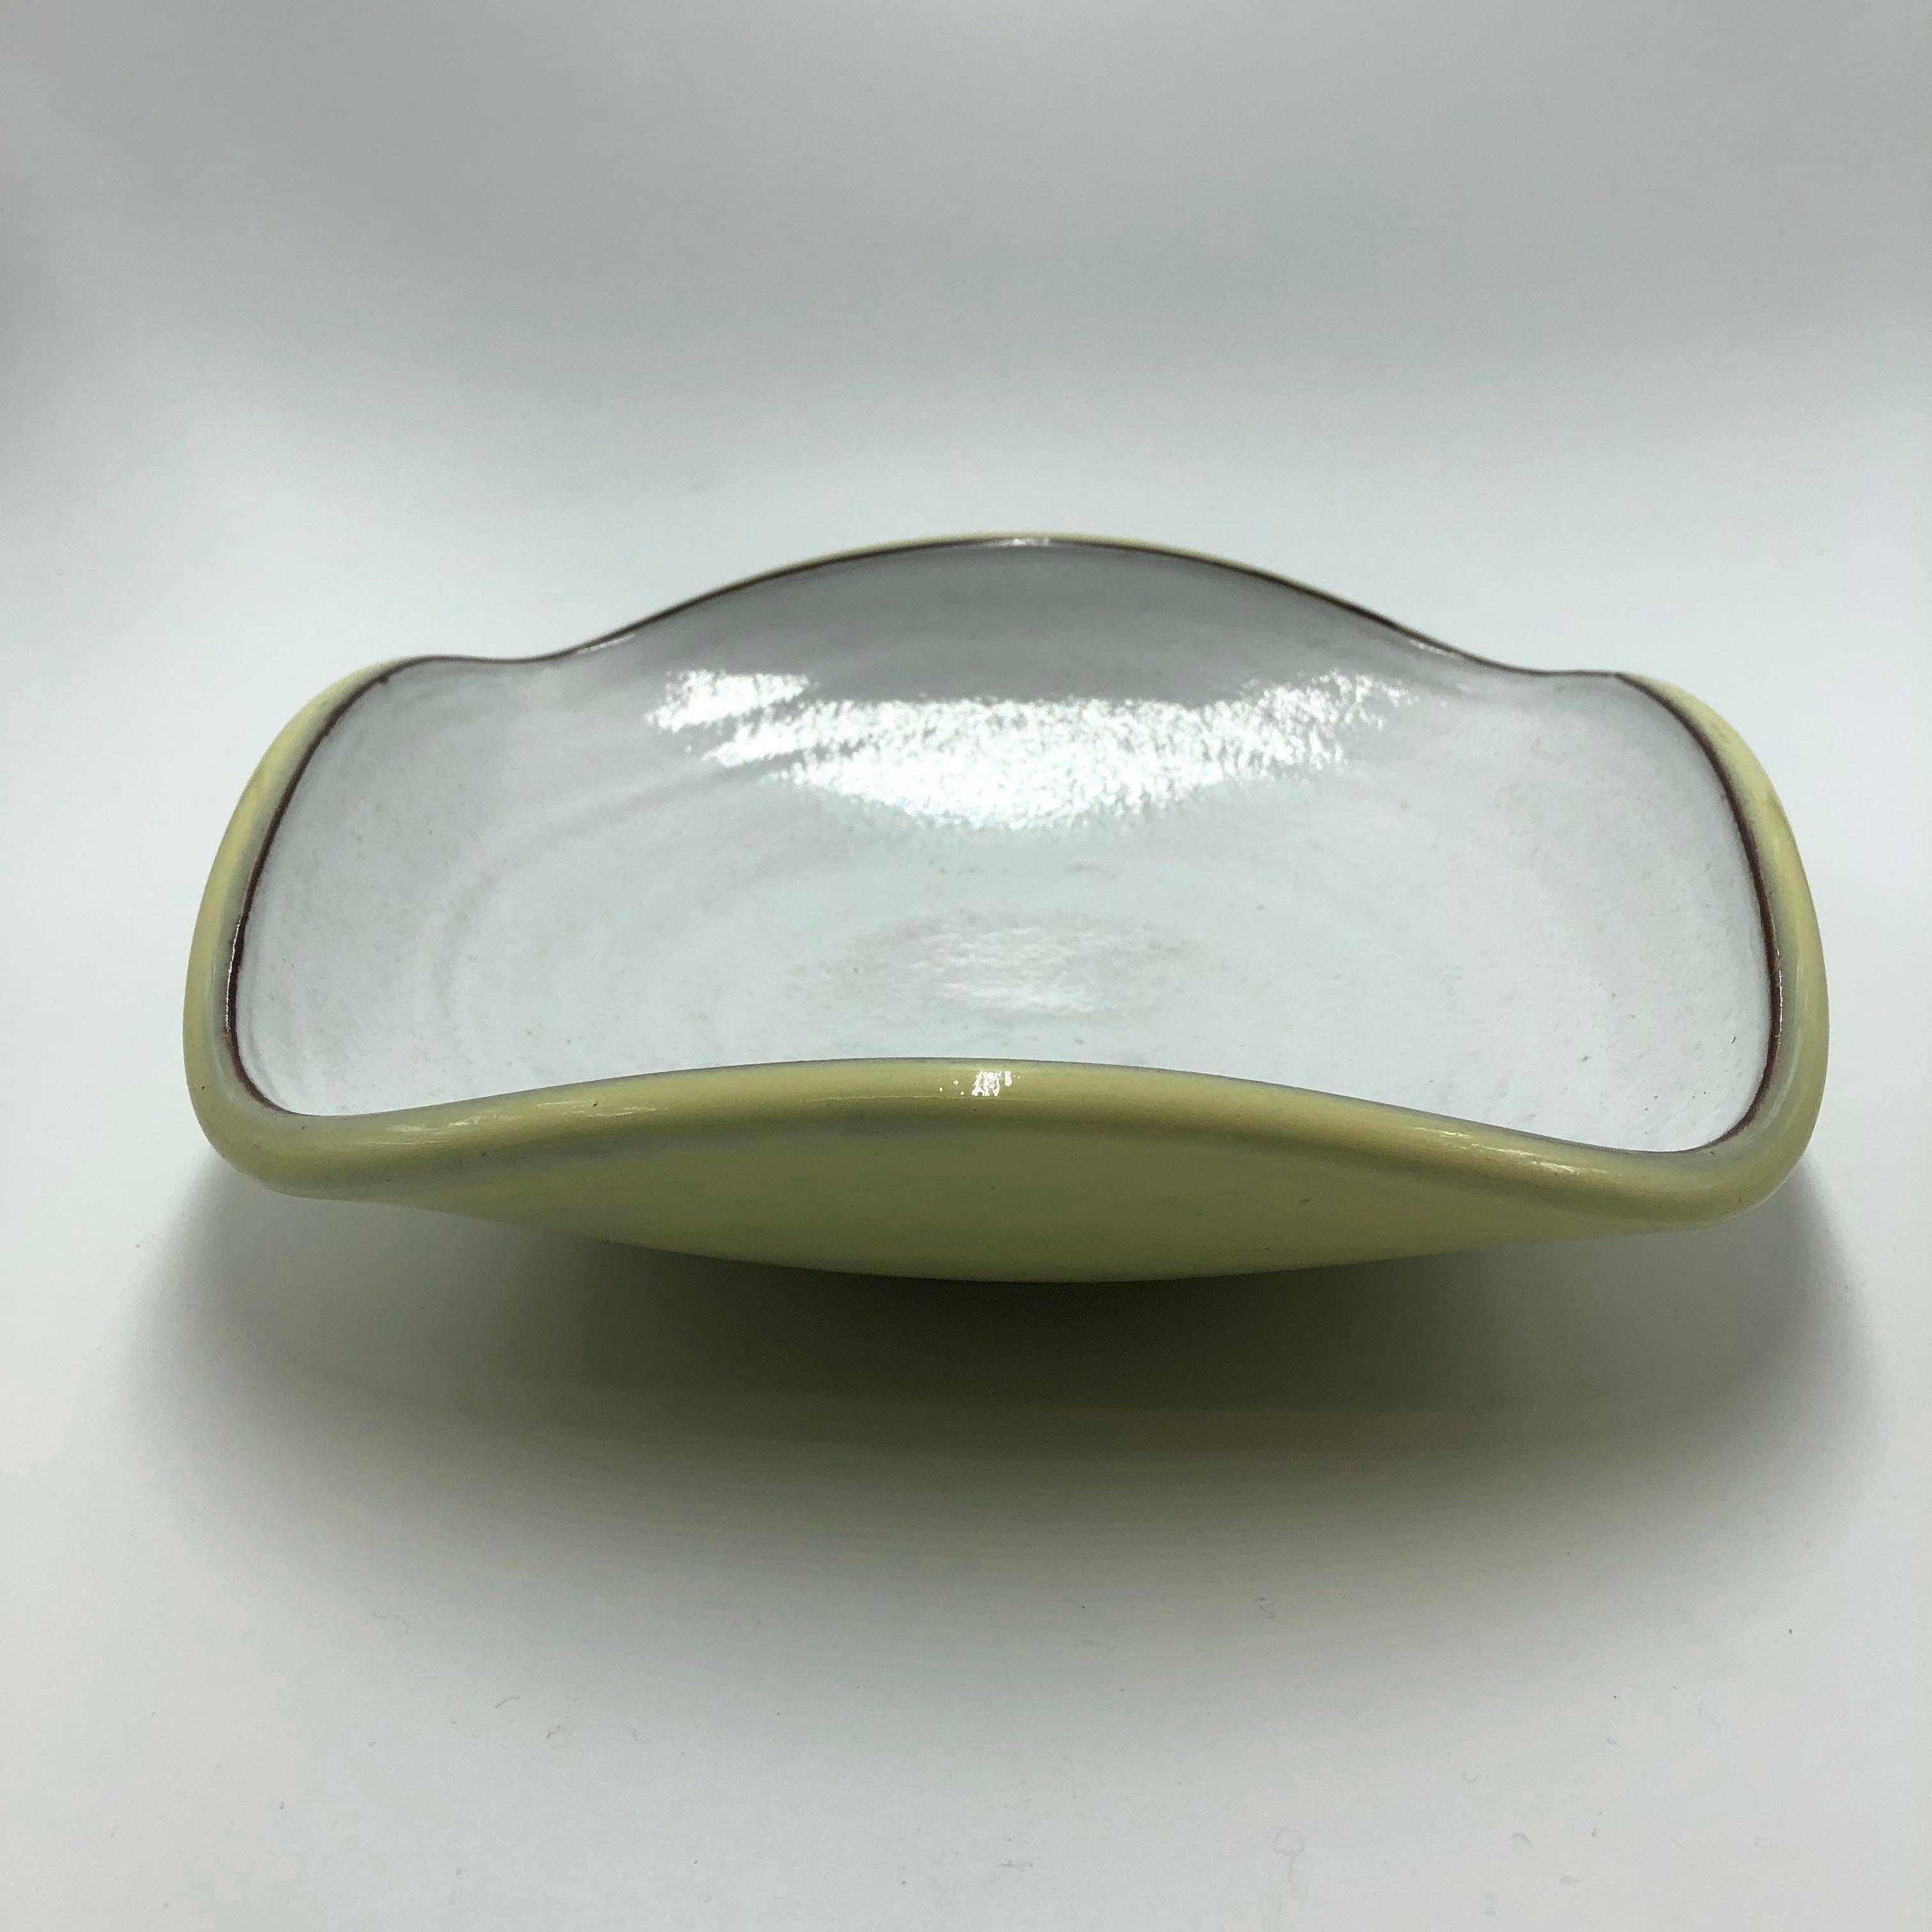 Hand-thrown and glazed stoneware dish from the Zaalberg atelier in Leiden (Zuid-Holland), circa 1960s.
The dish is in excellent original condition.